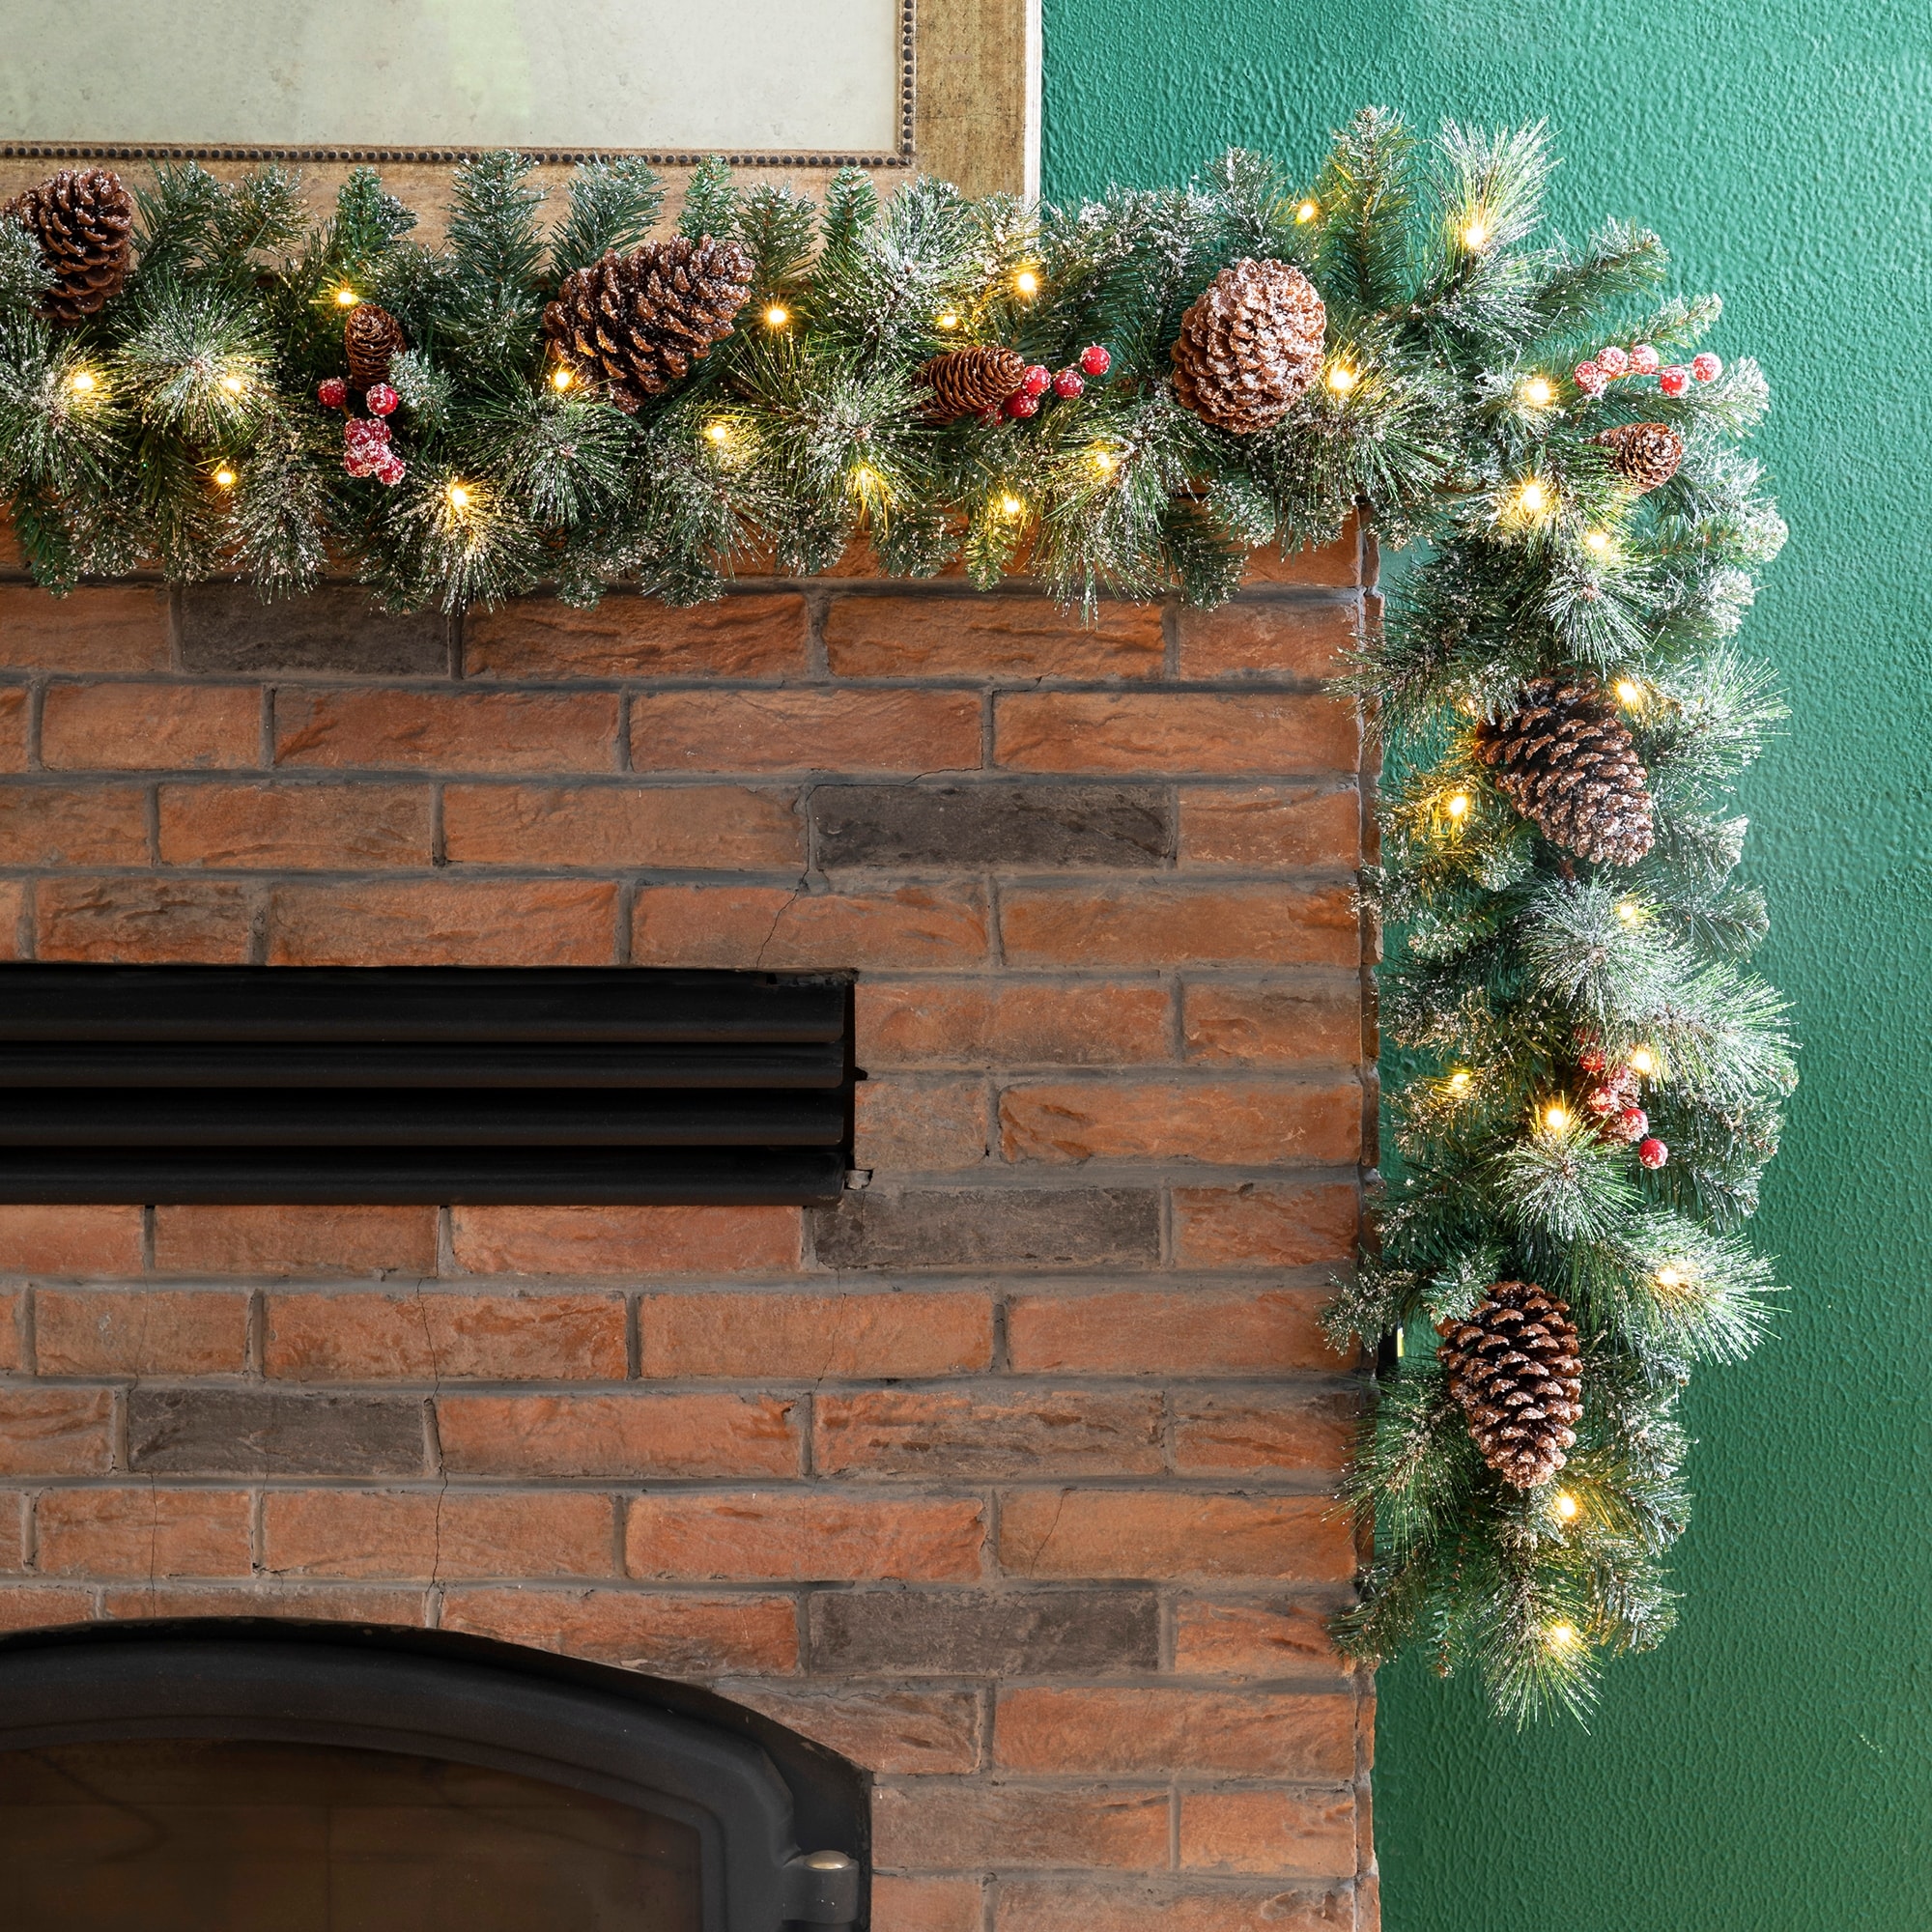 Details about   6FT Pre Lit Christmas Garland with Lights Door Wreath Xmas Fireplace DIY Decor 